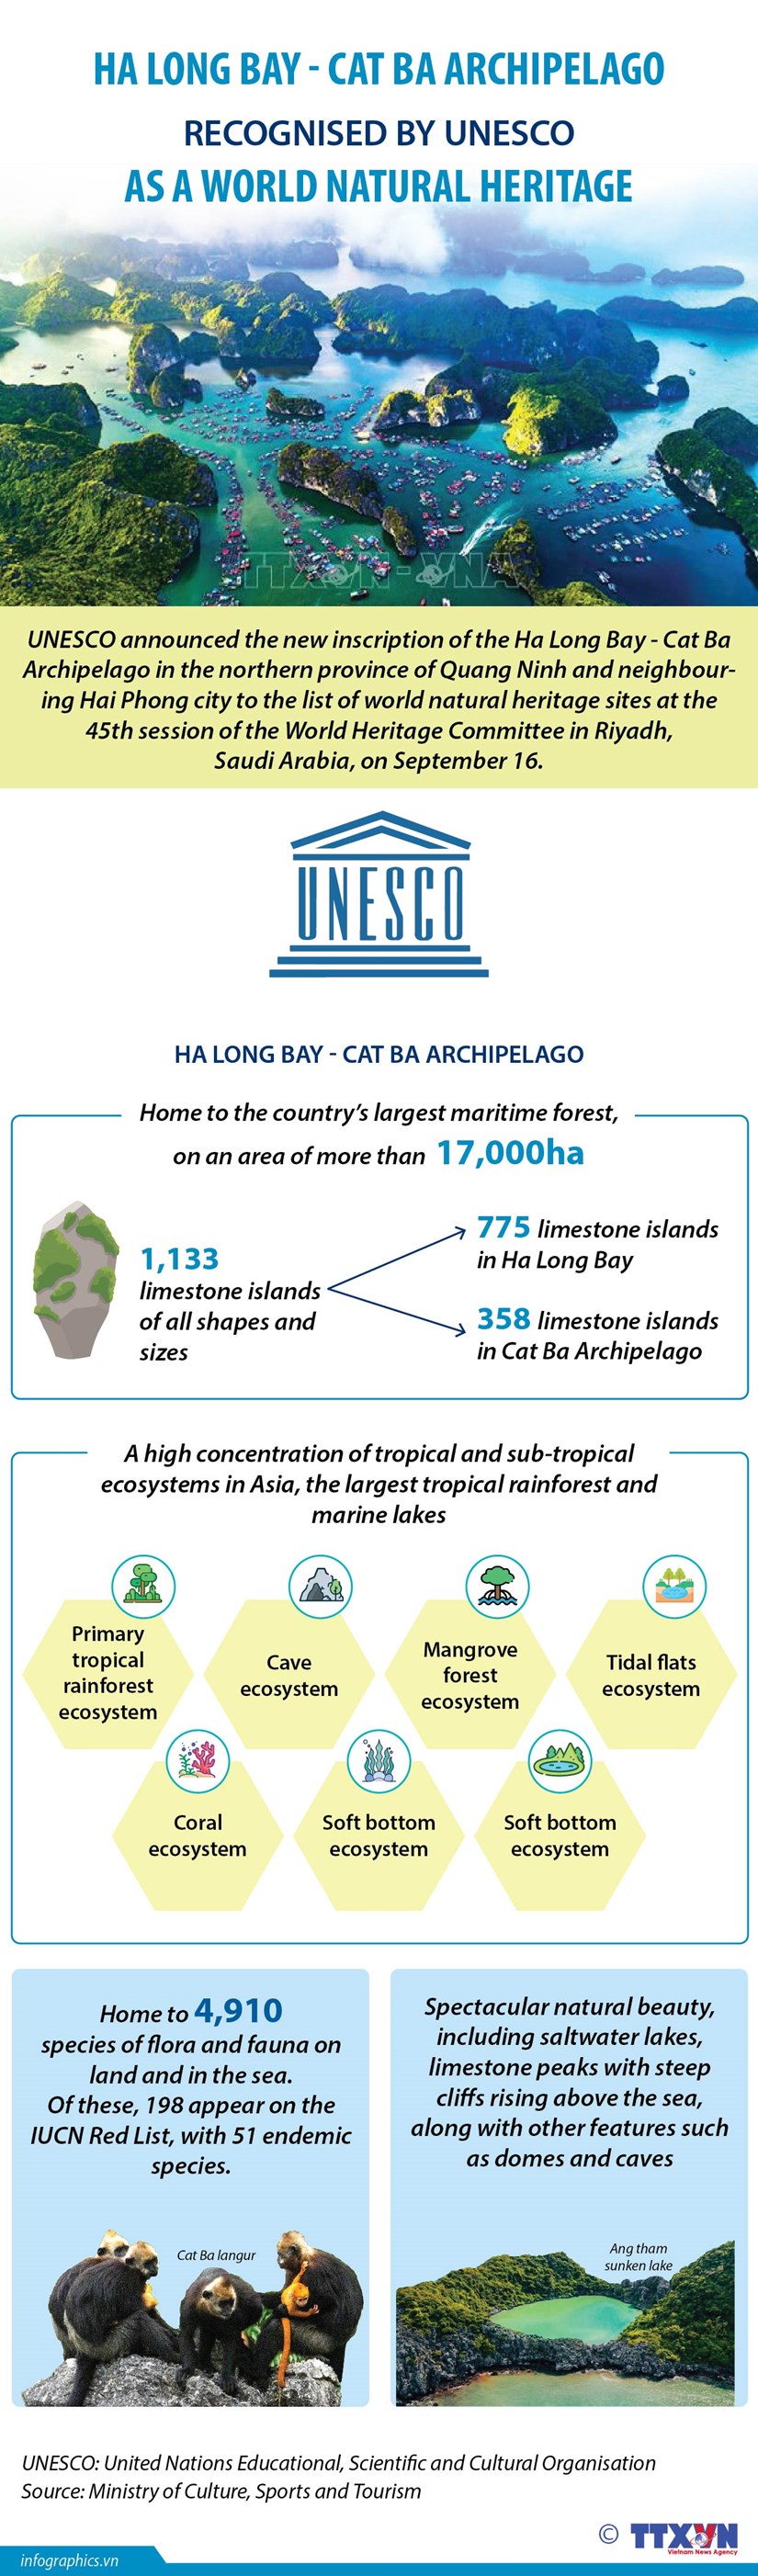 Ha Long Bay - Cat Ba Archipelago recognised as world natural heritage hinh anh 1